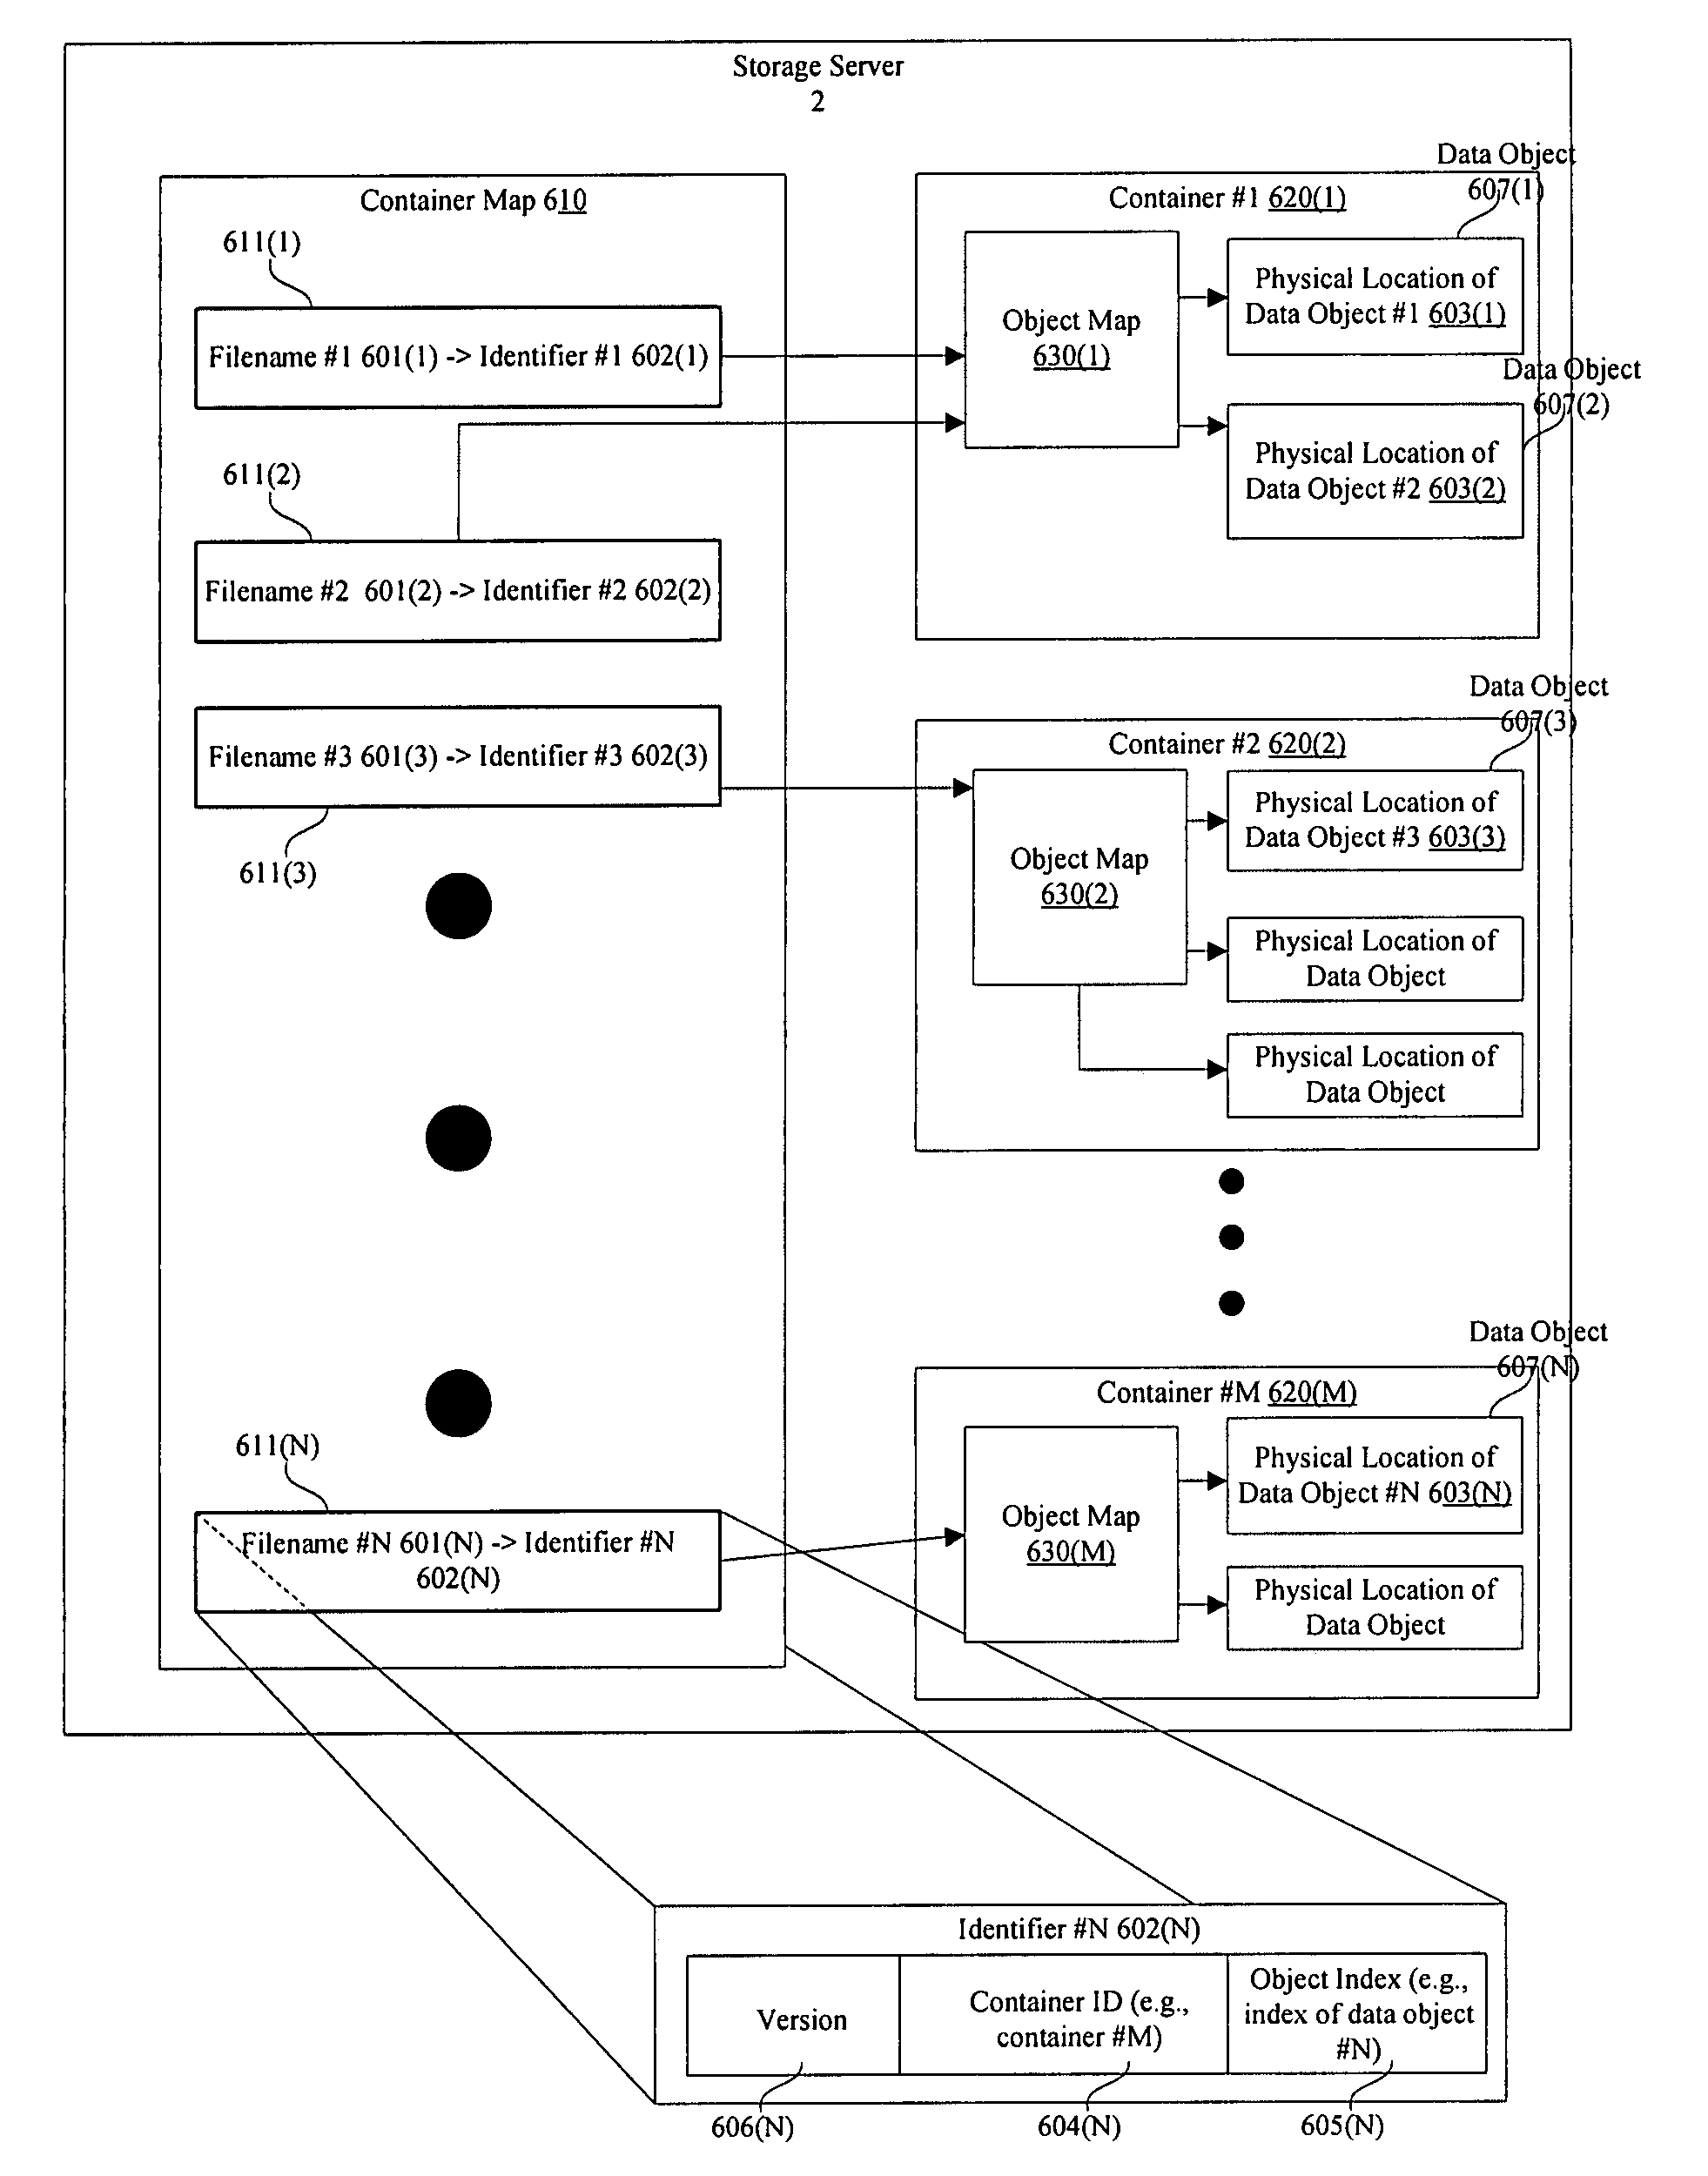 Merging containers in a multi-container system